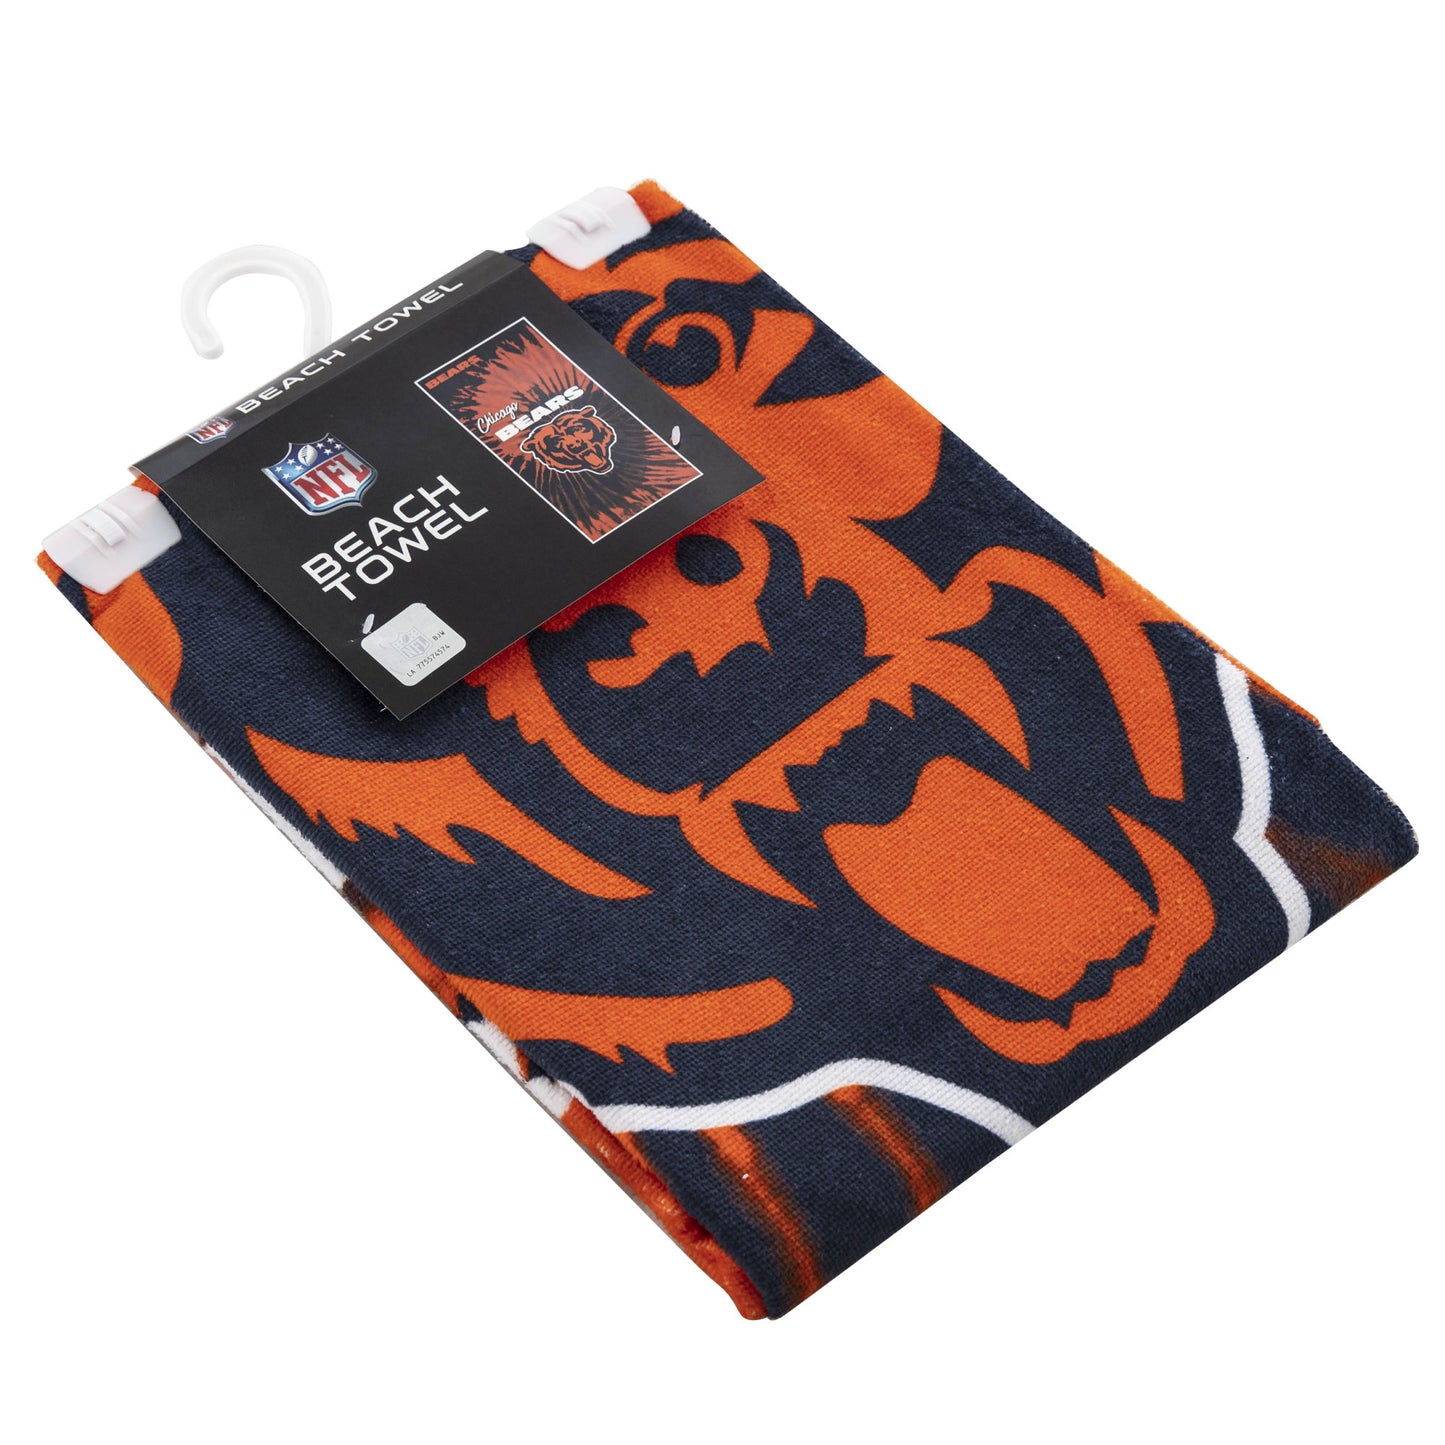 Bears OFFICIAL NFL "Psychedelic" Beach Towel; 30" x 60"